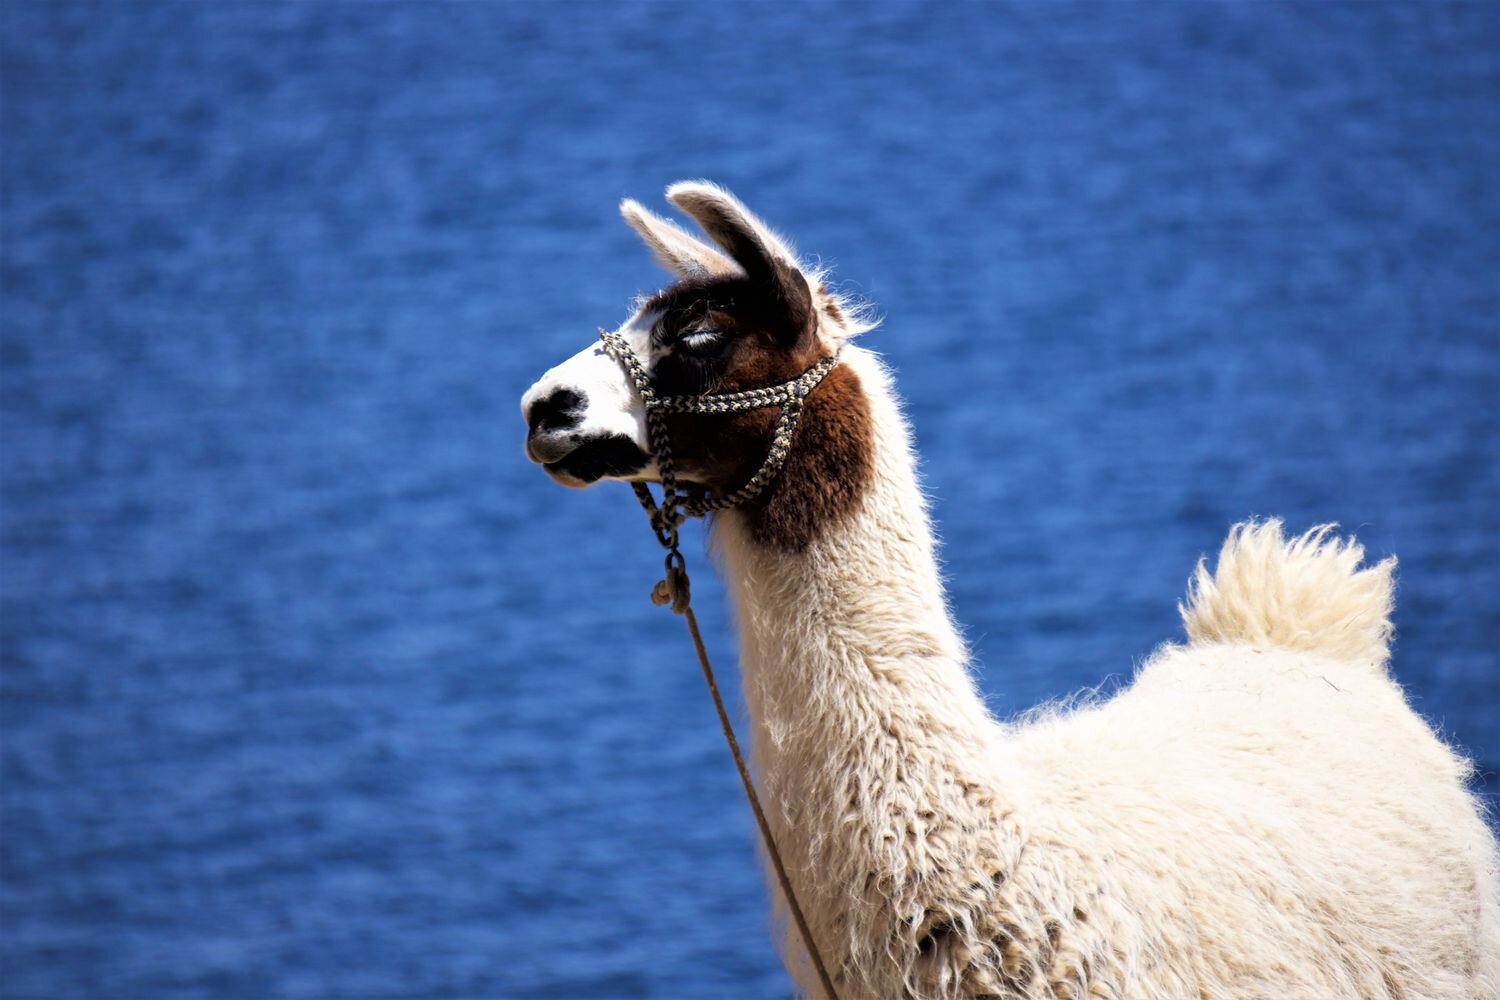  Lama remains the most important domestic animals in the Sun Island. Lake Titicaca. 